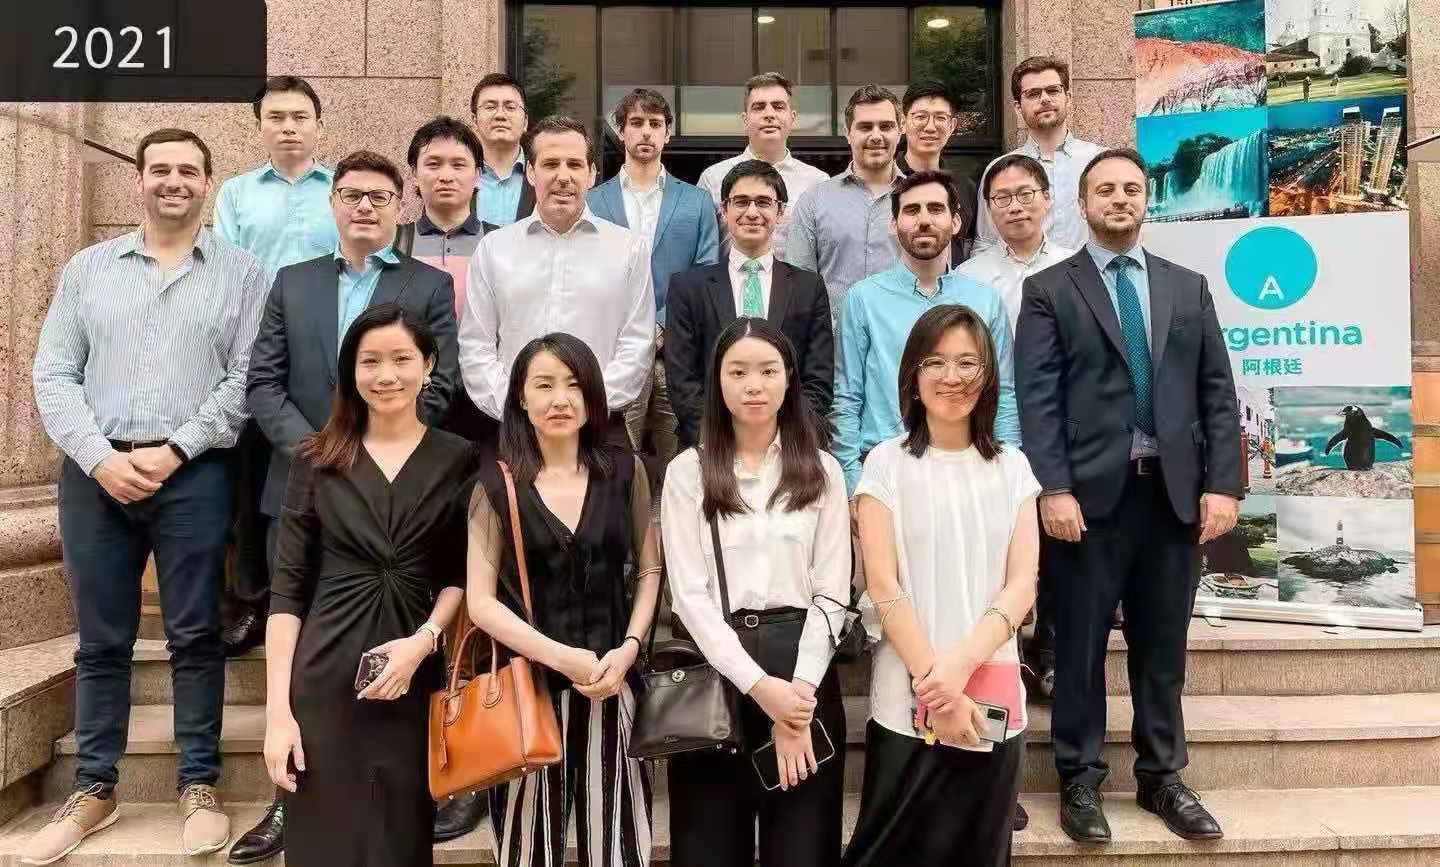 Parral Consulting participated in these events organized by the Argentine Consulate in Shanghai, among companies such as Arcor, Biogénesis Bagó, Terragene and Zanella, sharing experiences and evaluating business development perspectives.